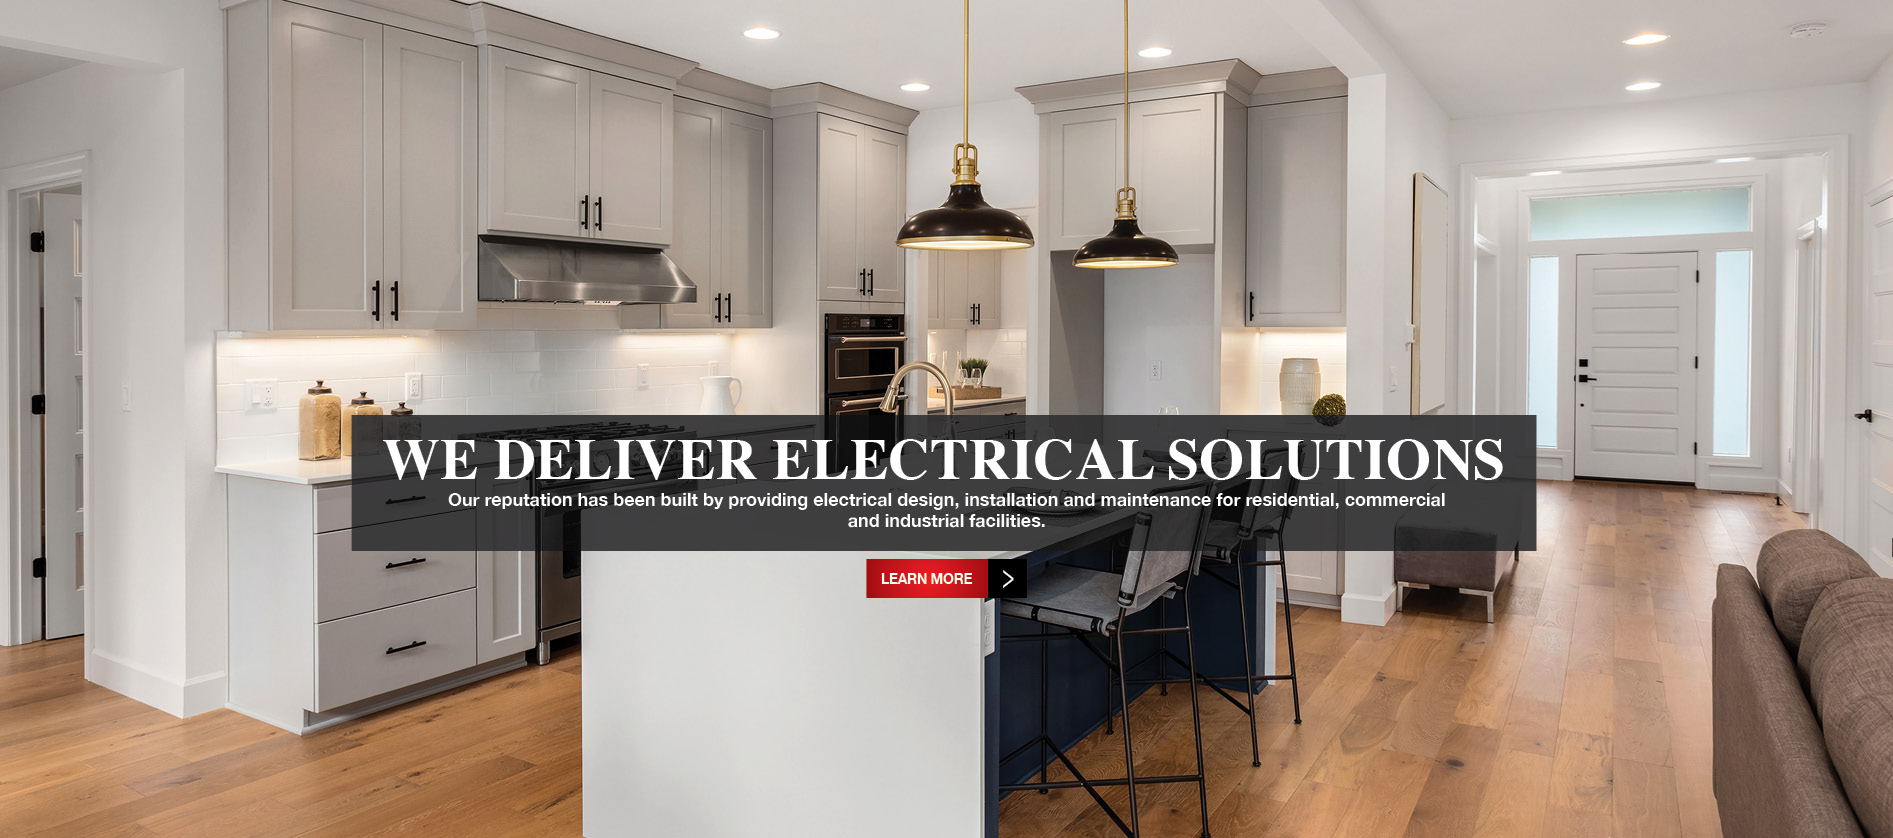 We deliver electrical solutions - Our reputation has been built by providing electrical design, installation and maintenance for residential, commercial and industrial facilities.